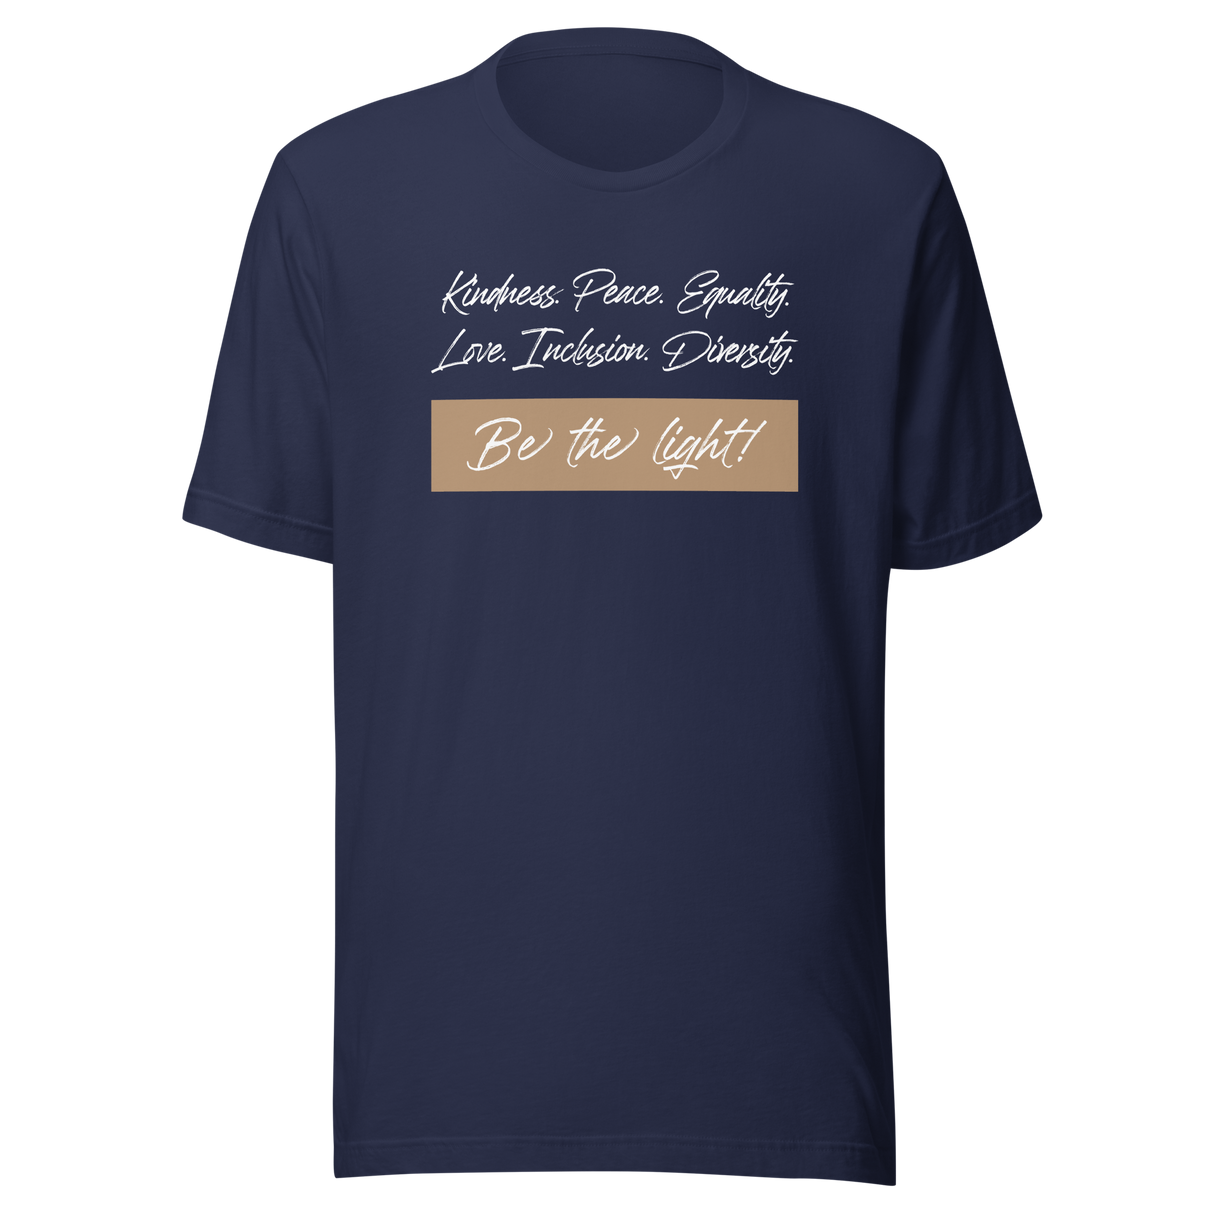 kindness-peace-equality-love-inclusion-diversity-be-the-light-kindness-tee-equality-t-shirt-peace-tee-facts-t-shirt-truth-tee#color_navy